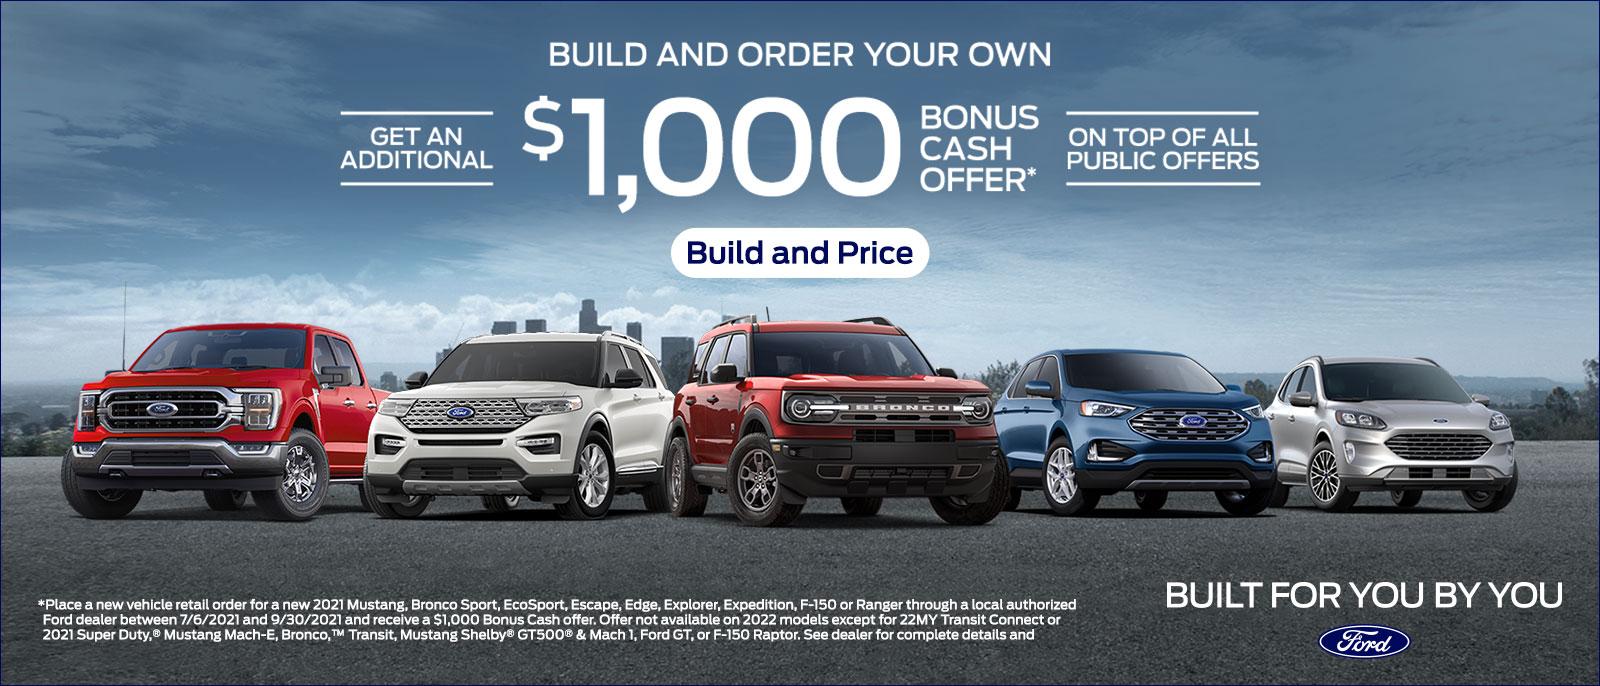 ford-lease-deals-incentives-groveport-oh